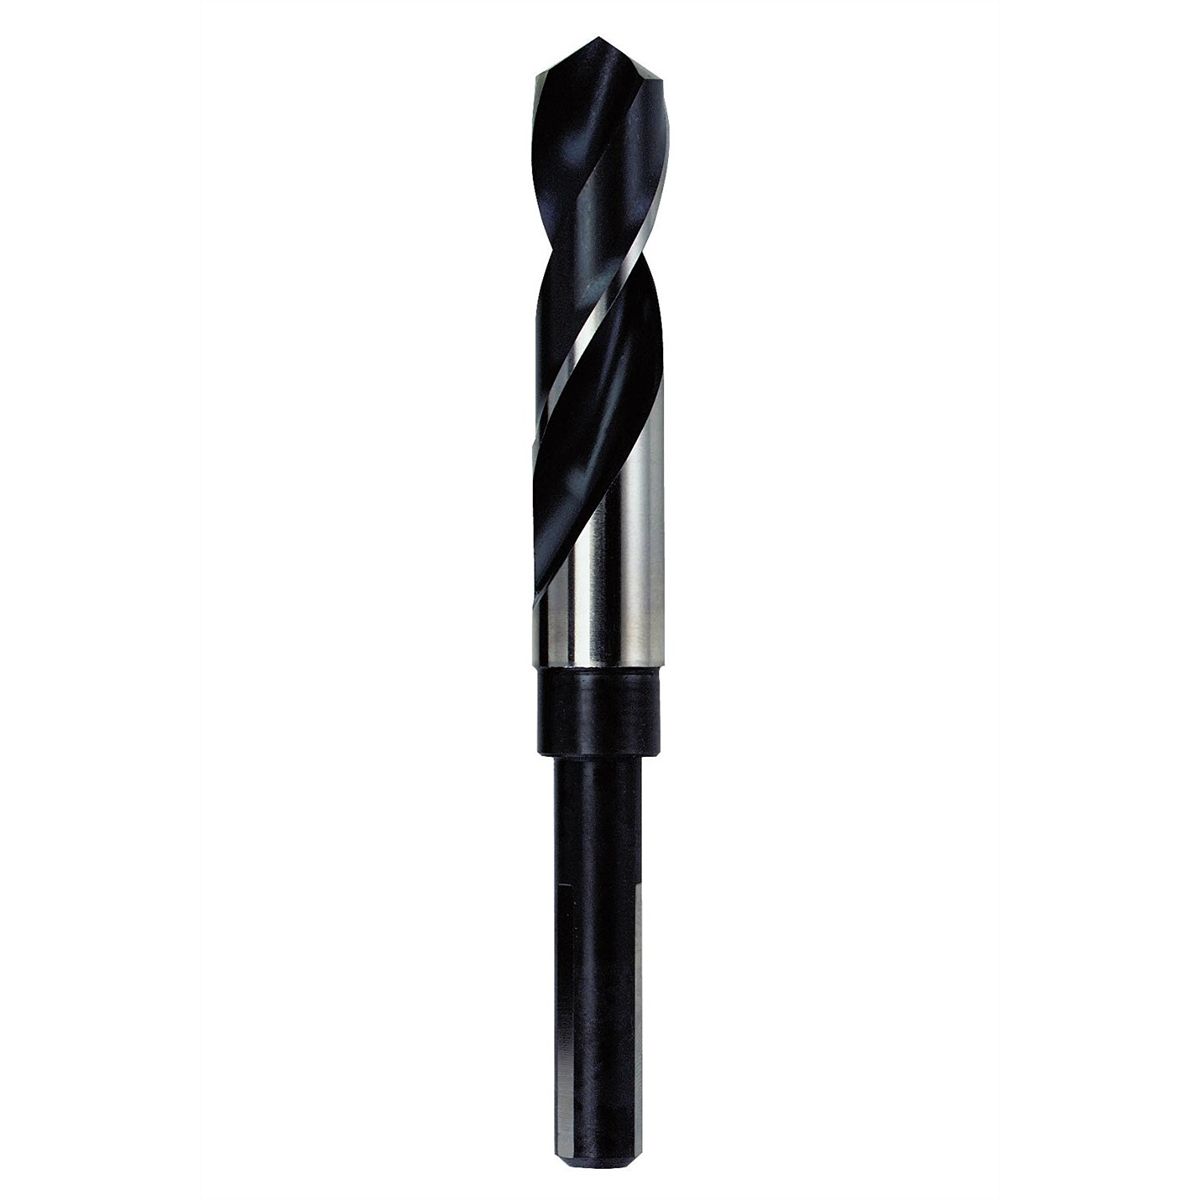 1-1/4 HSS 1/2 Reduced Shank Silver and Deming Drill Bit